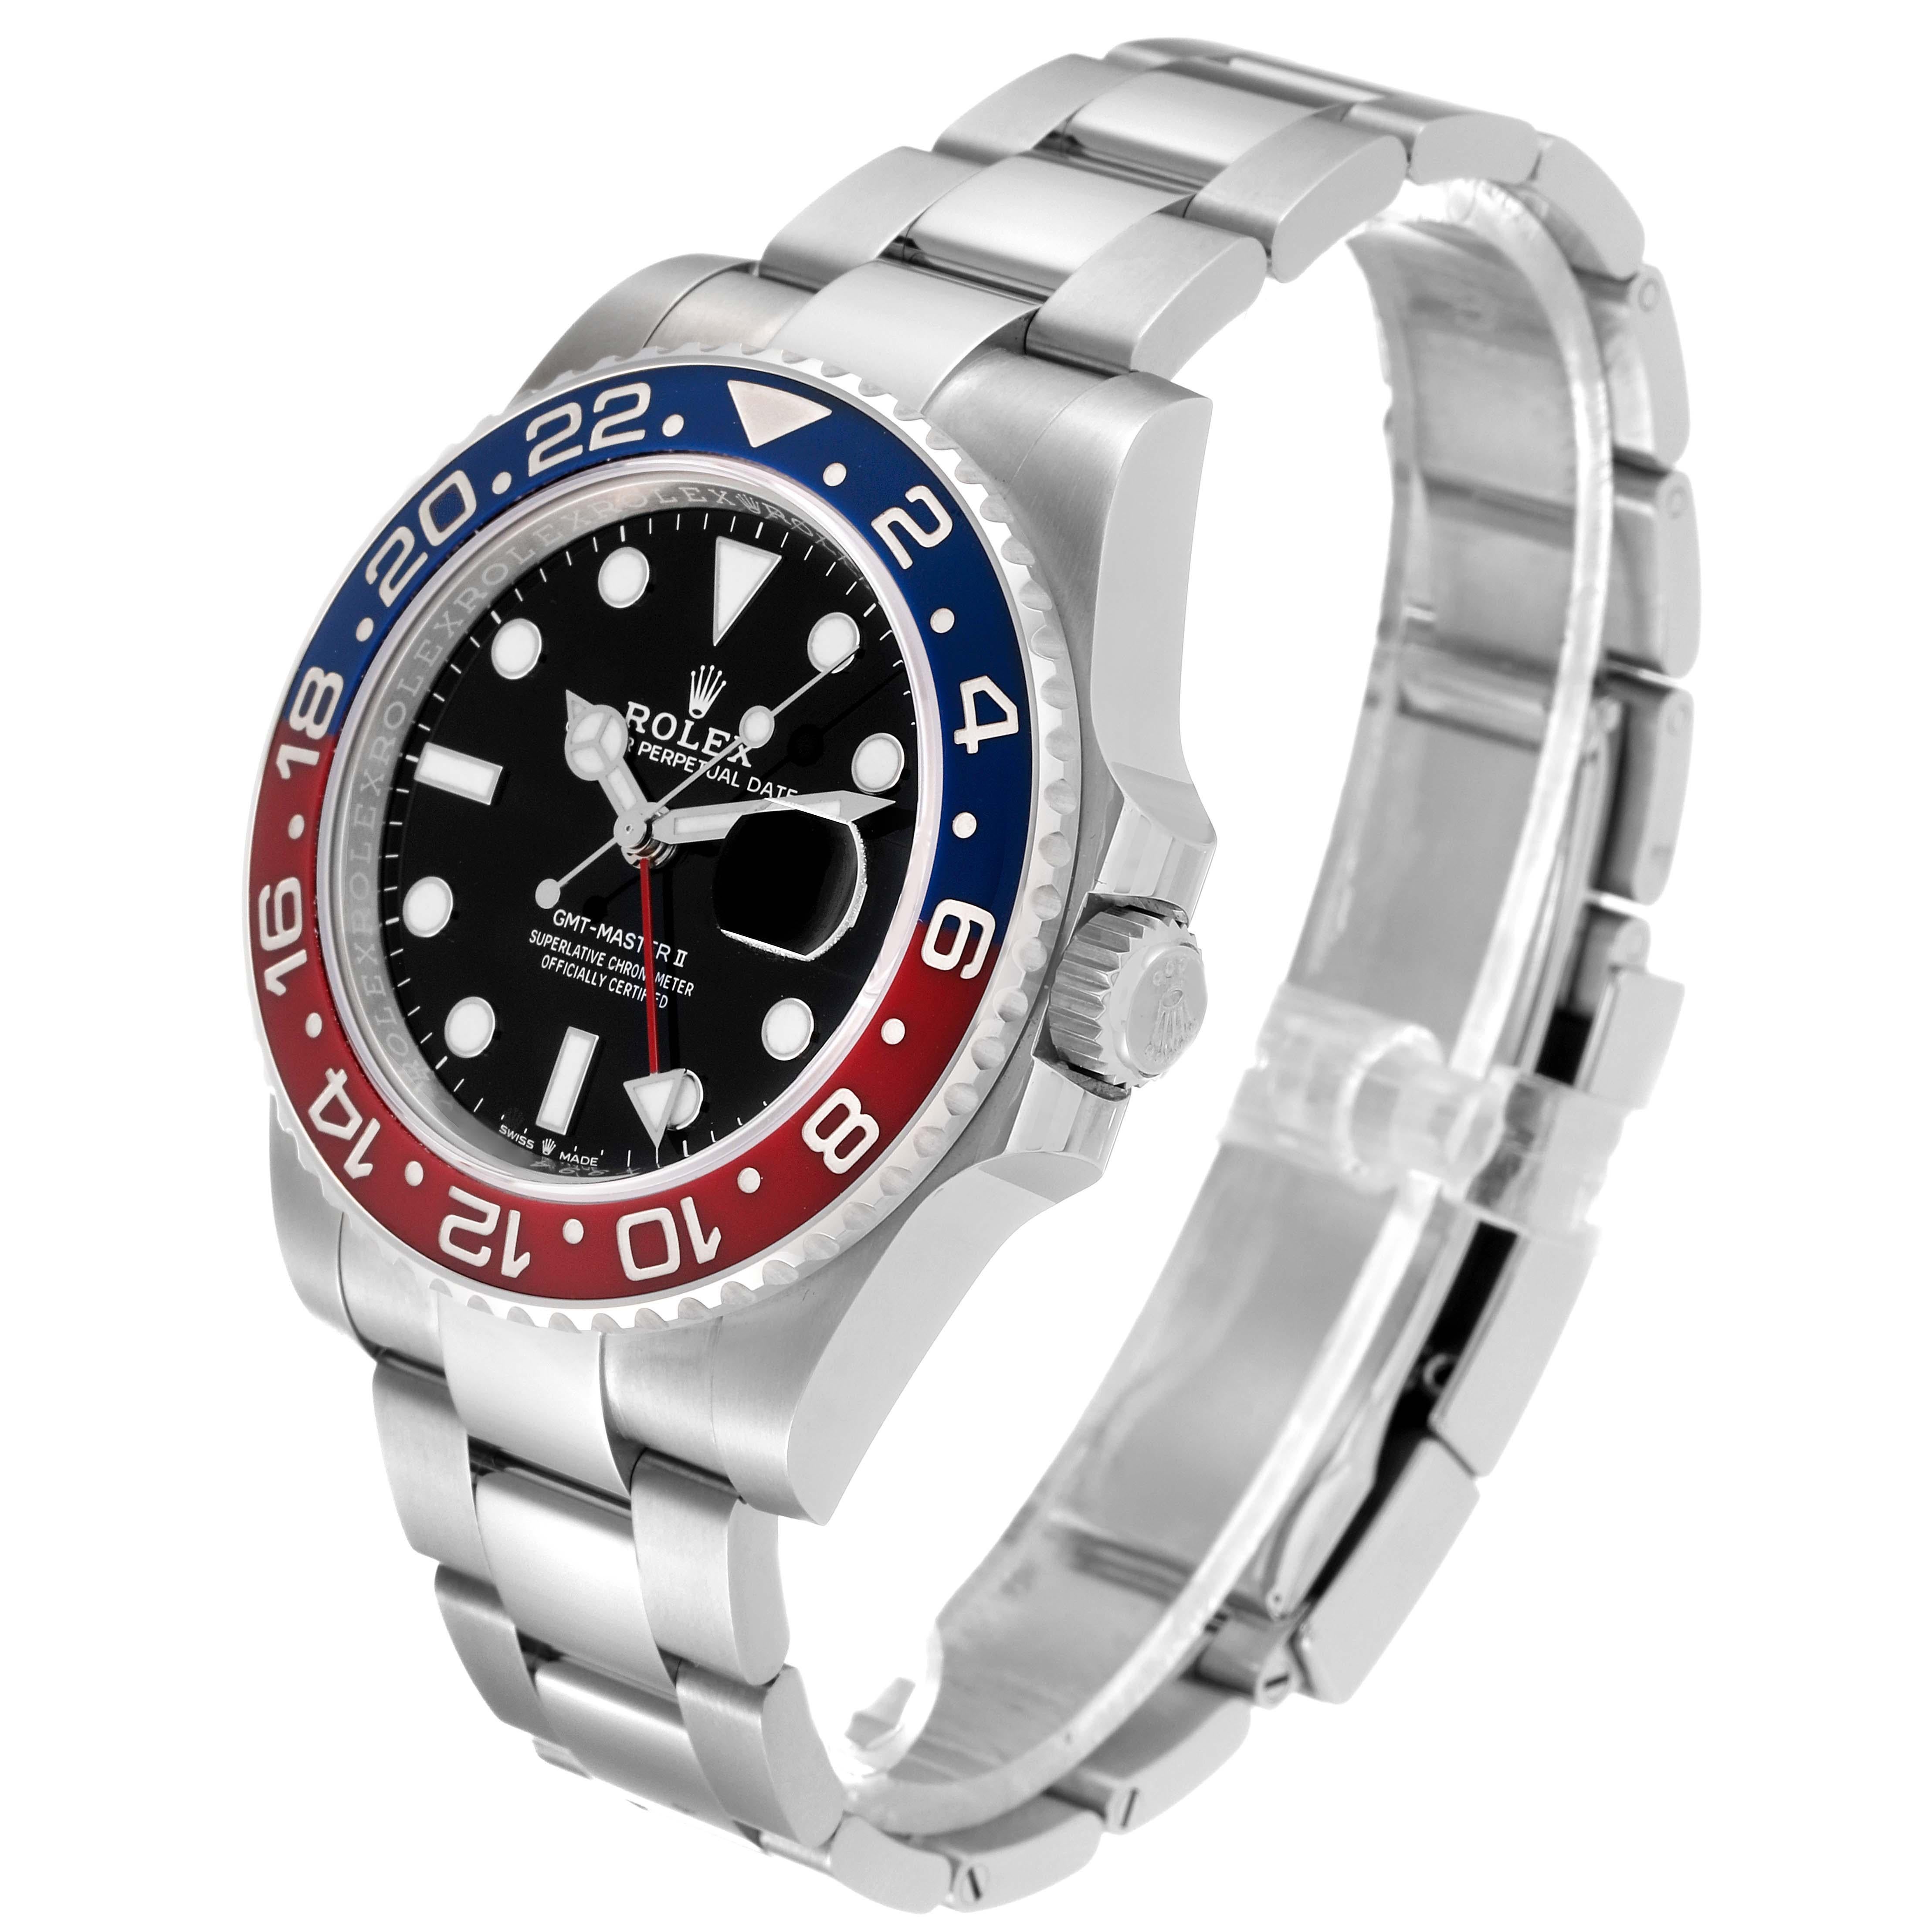 Rolex GMT Master II Blue Red Pepsi Bezel Steel Mens Watch 126710 Unworn. Officially certified chronometer automatic self-winding movement. Stainless steel case 40 mm in diameter. Rolex logo on the crown. Stainless steel bidirectional rotating bezel